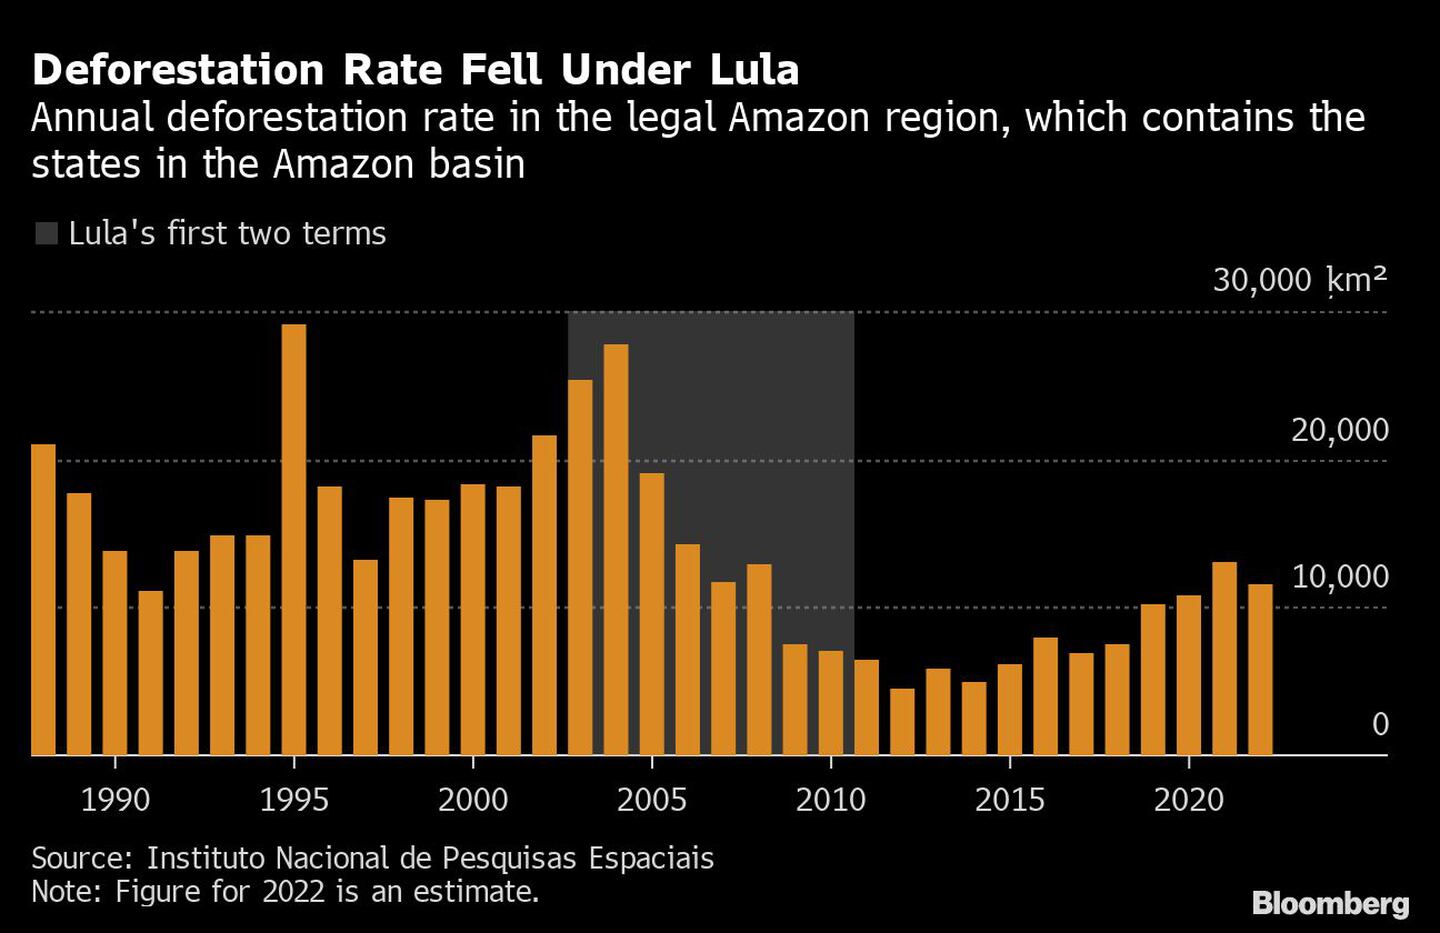 Deforestation Rate Fell Under Lula | Annual deforestation rate in the legal Amazon region, which contains the states in the Amazon basindfd